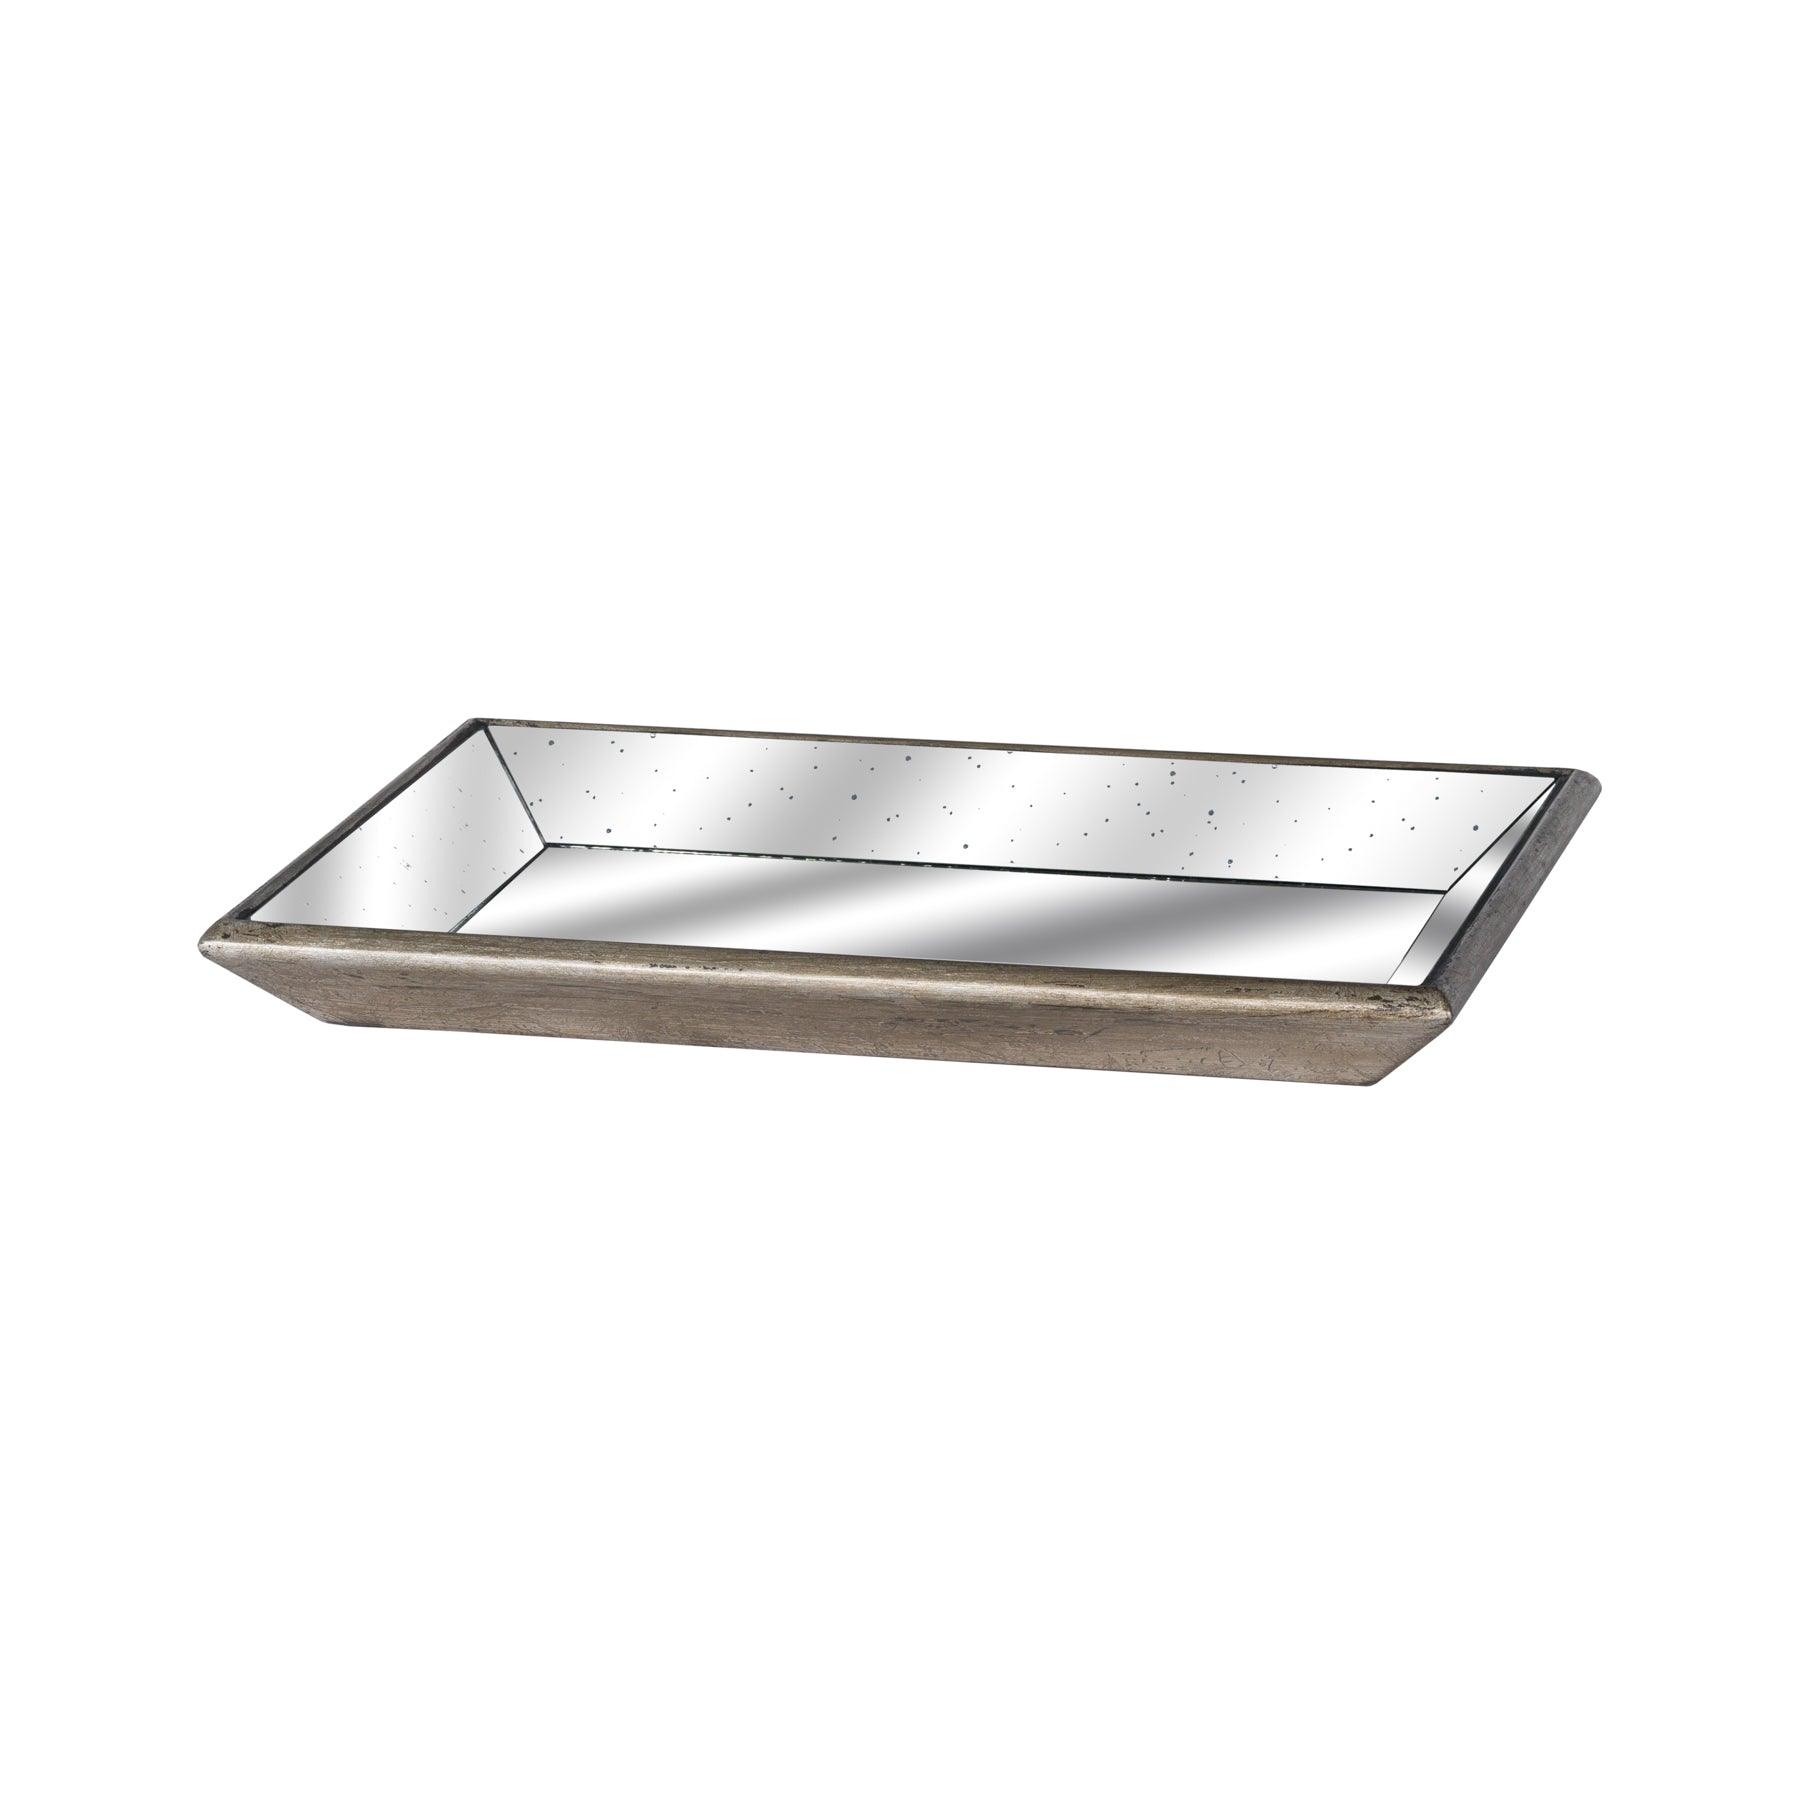 Astor Distressed Mirrored Tray With Wooden Detailing - Vookoo Lifestyle